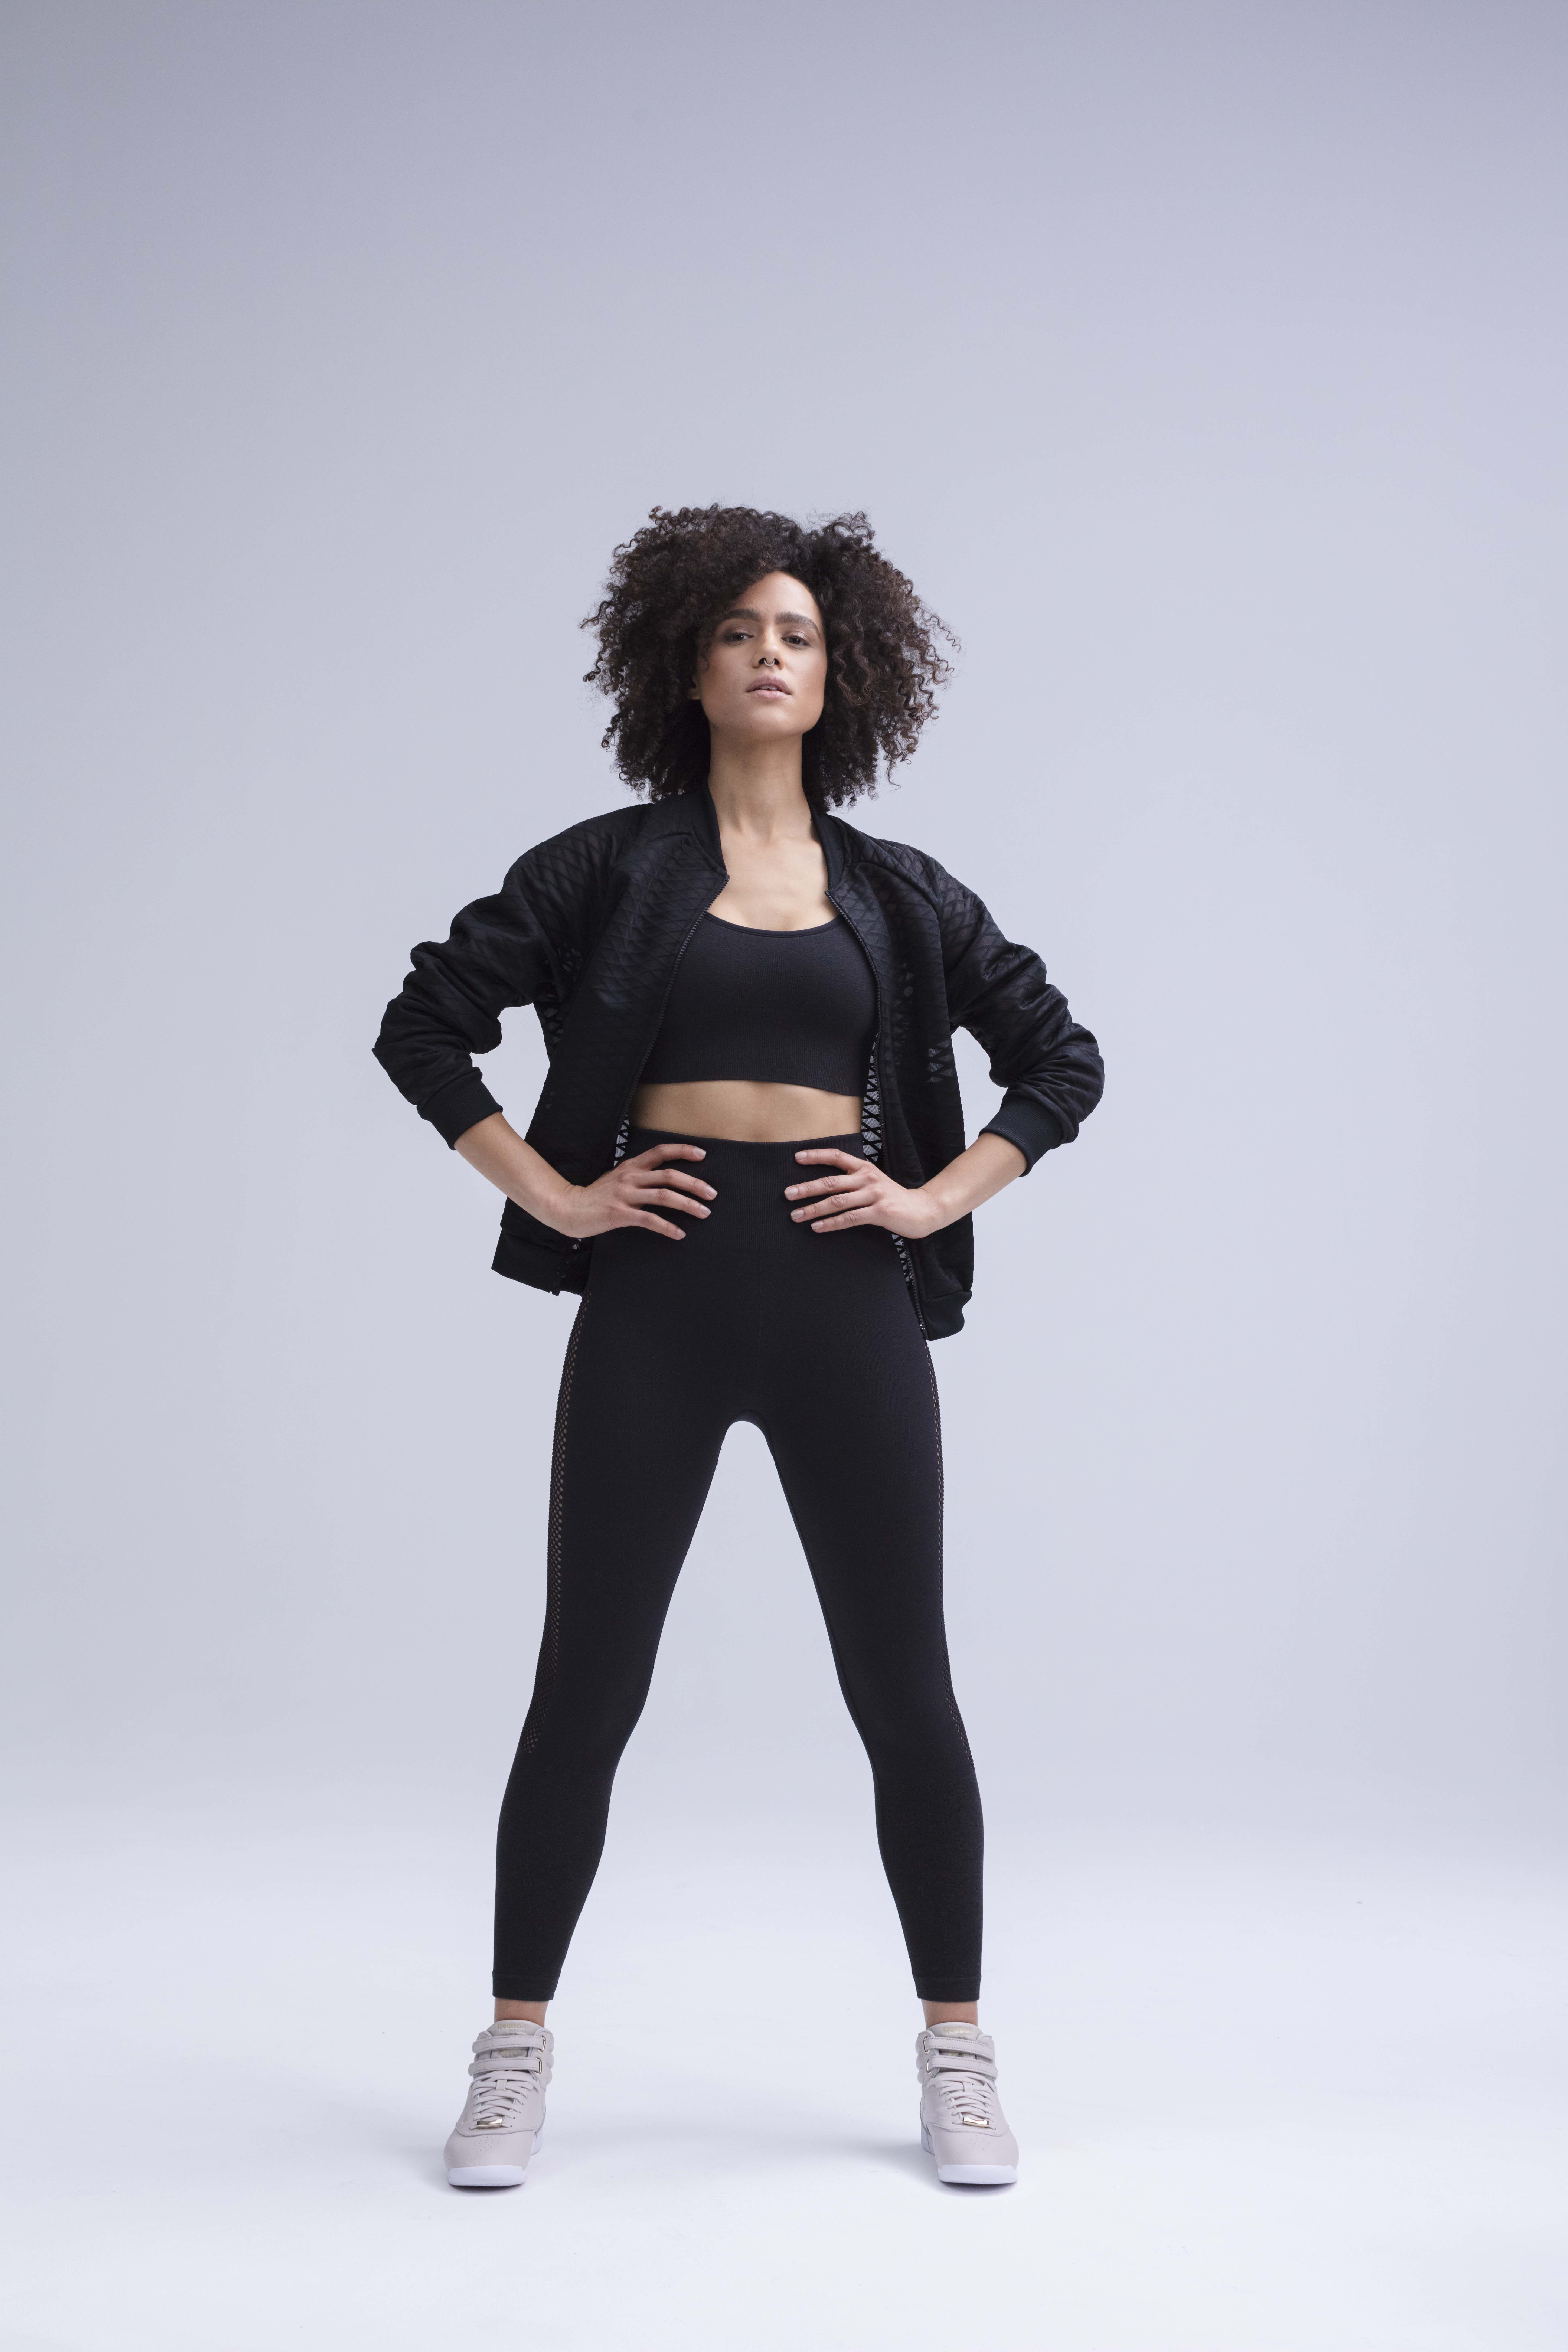 Nathalie Emmanuel Is All About Owning 